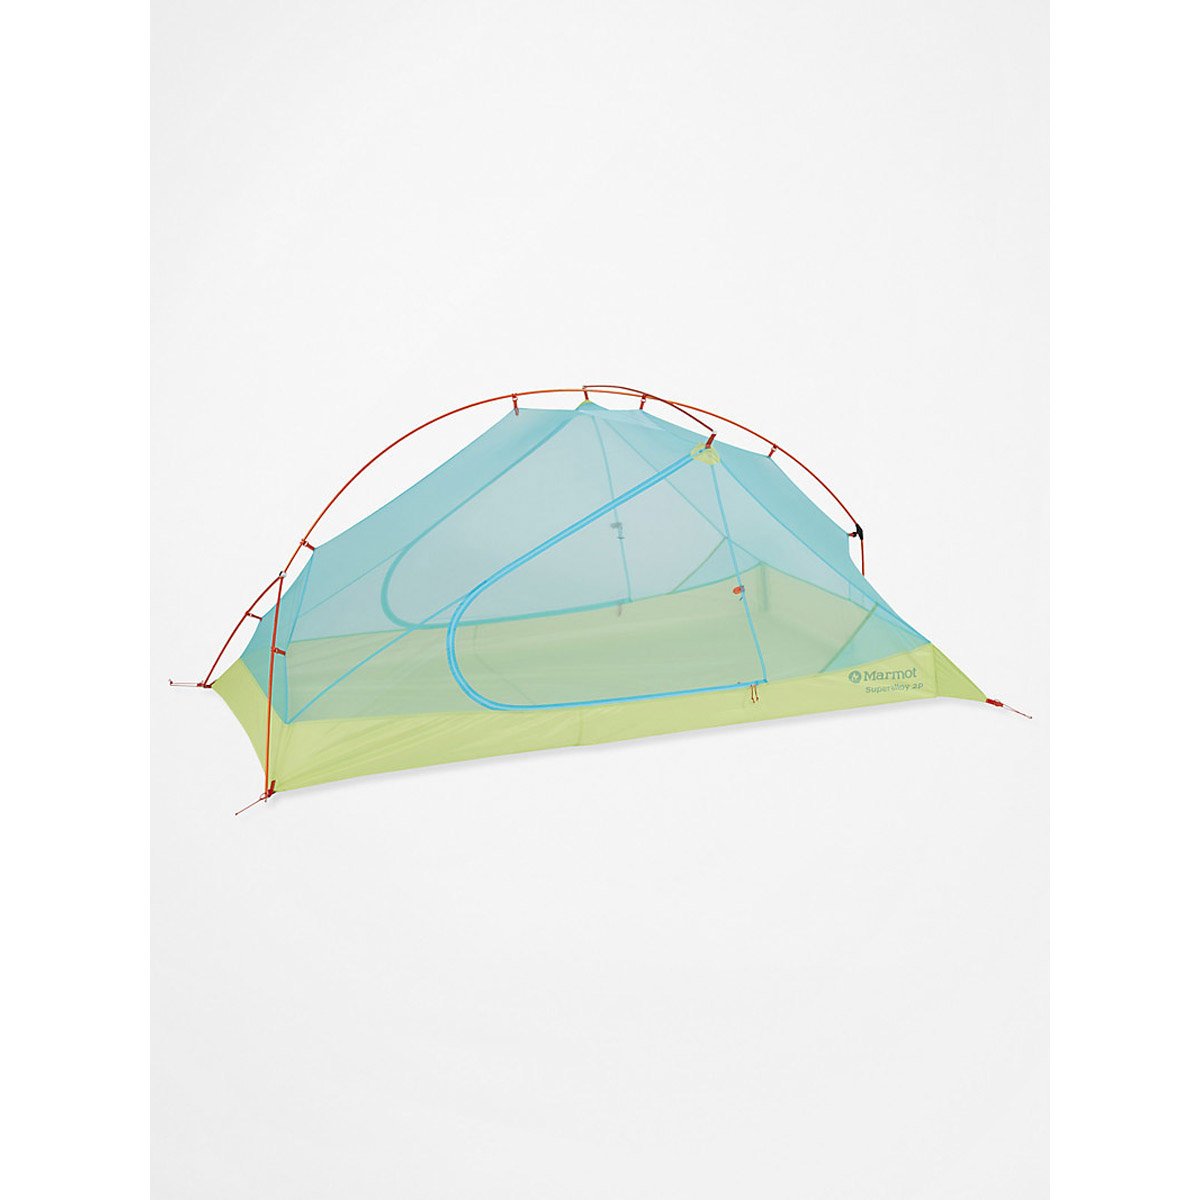 Marmot Superalloy 2-Person Tent-37860_Green Glow